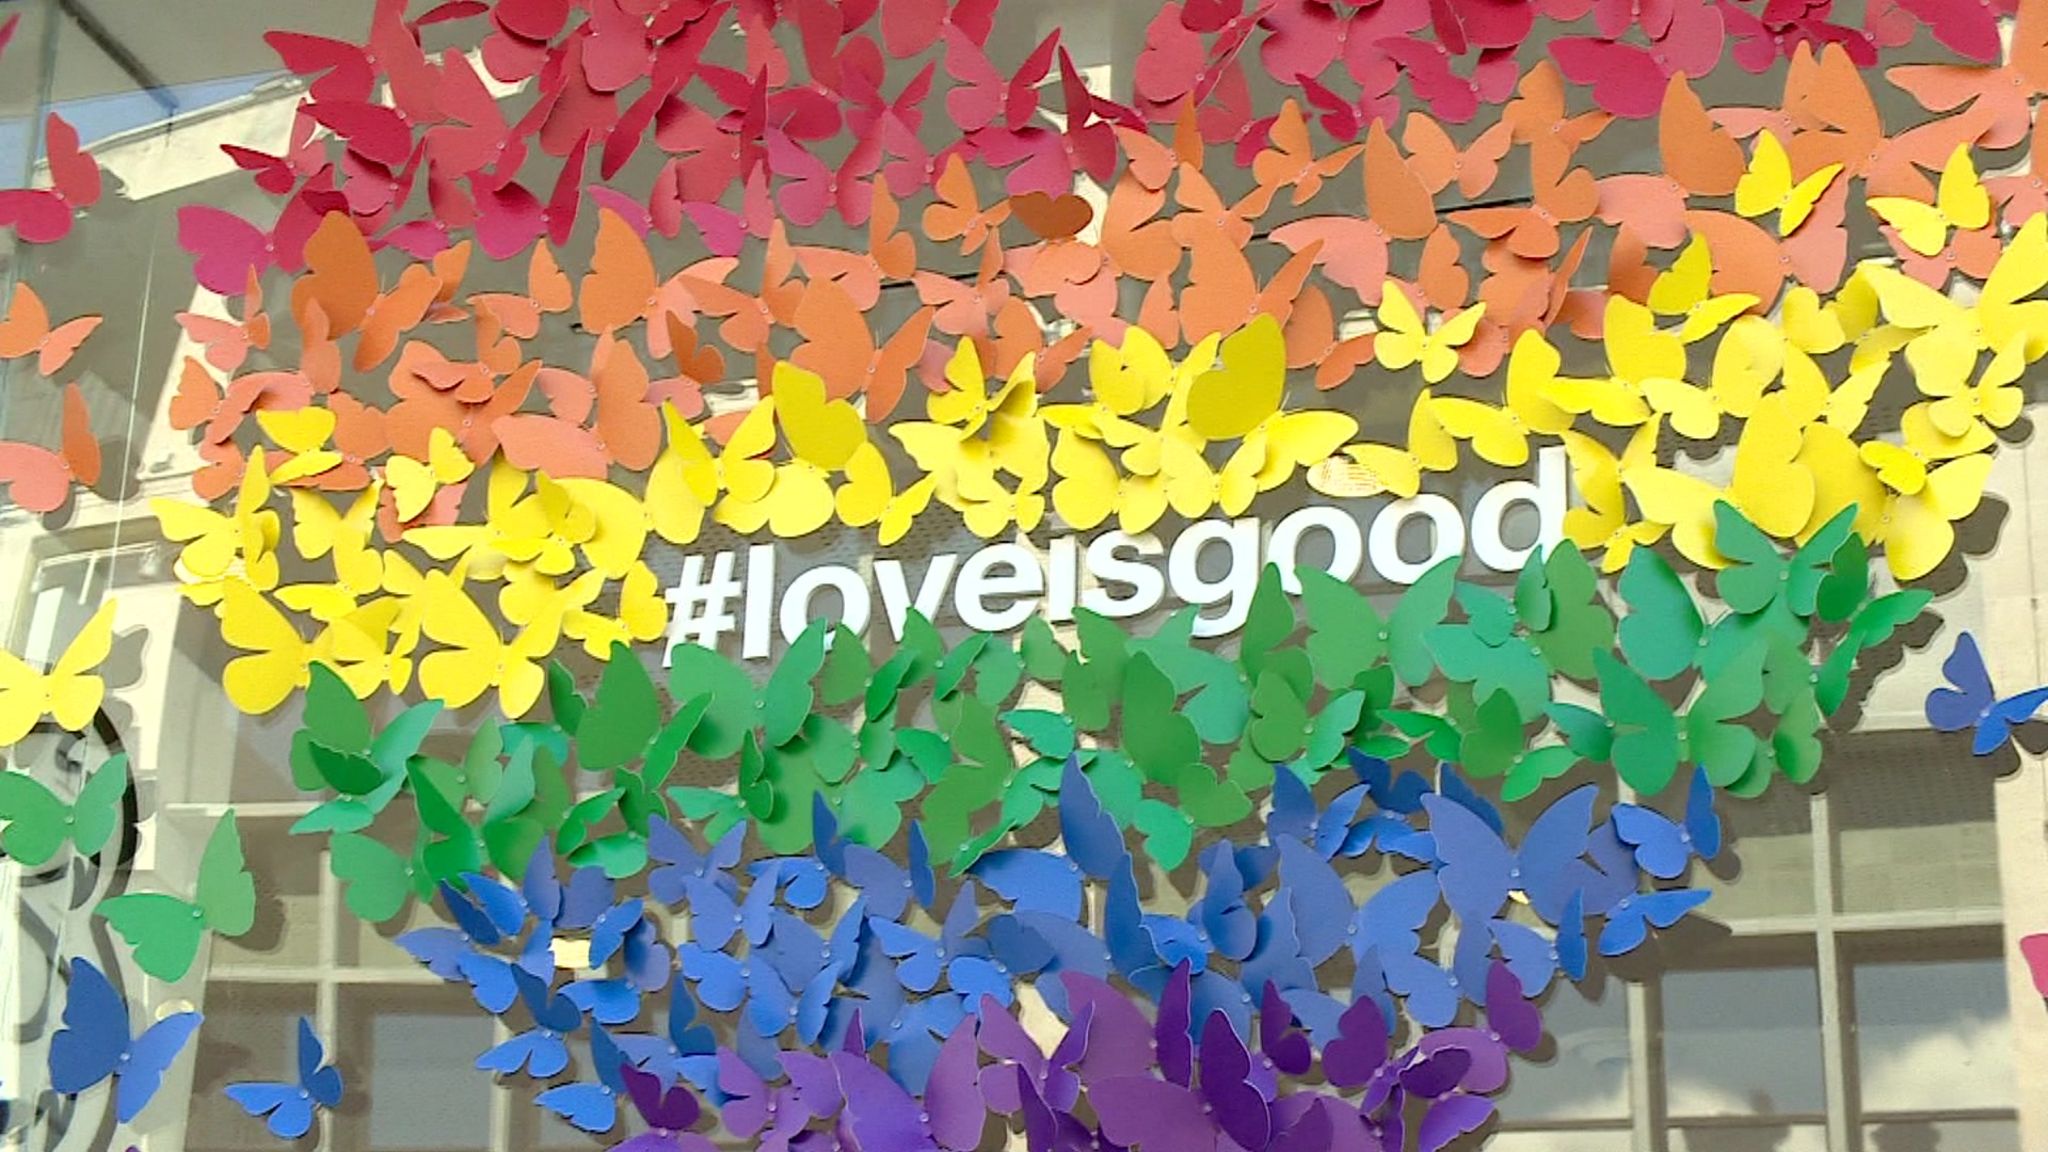 Pride inspired display with #loveisgood multi-coloured butterfly designed rainbow heart